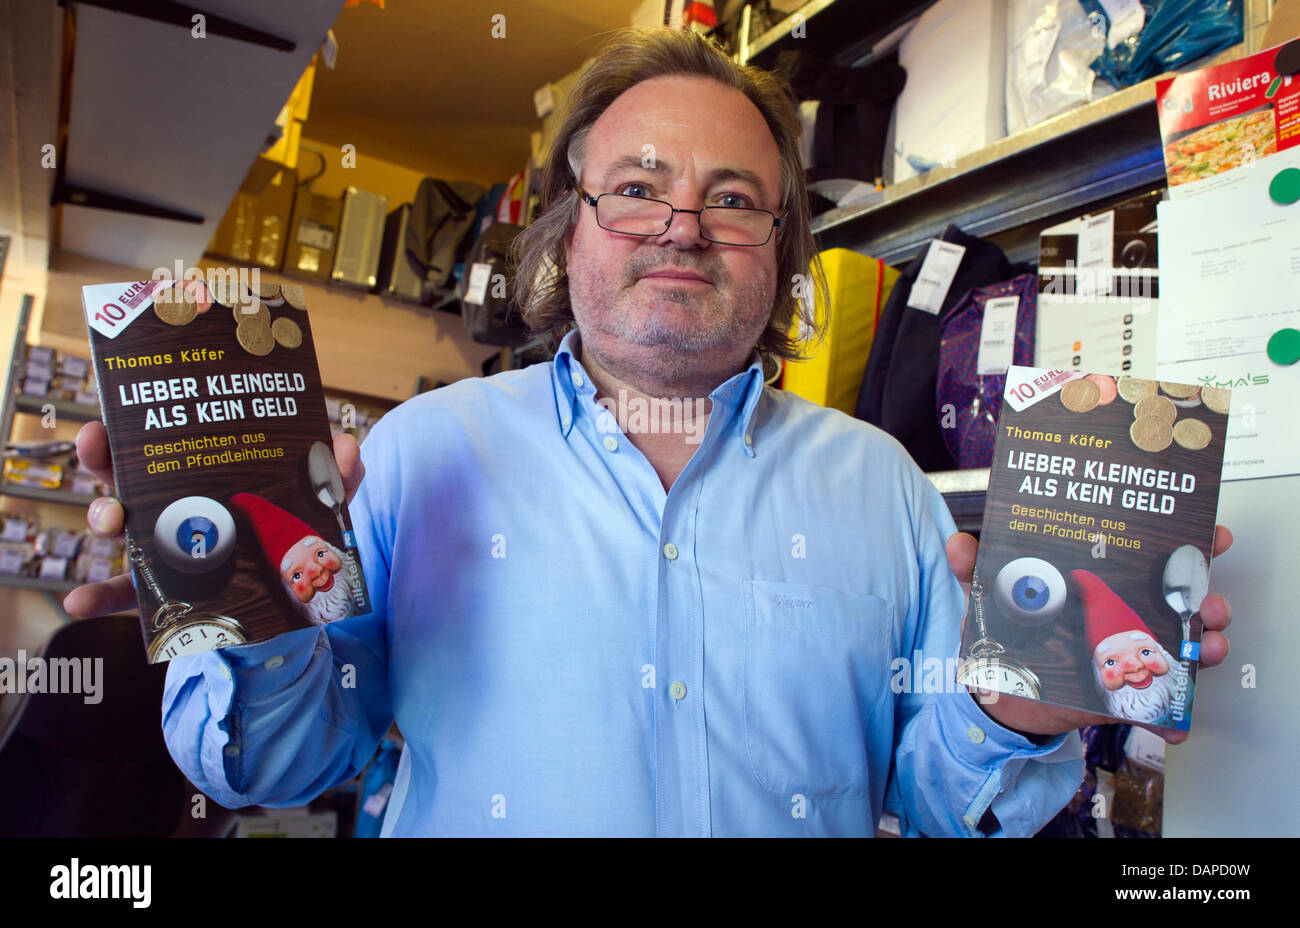 The pawnbroker Thomas Kaefer presents his book 'Lieber Kleingeld als kein Geld' ('Rather coins than no money') behind the window of the counter of his pawnbroking in Munich, Germany, 12 August 2011. Kaefer wrote about his experiences in his business. Photo: PETER KNEFFEL Stock Photo